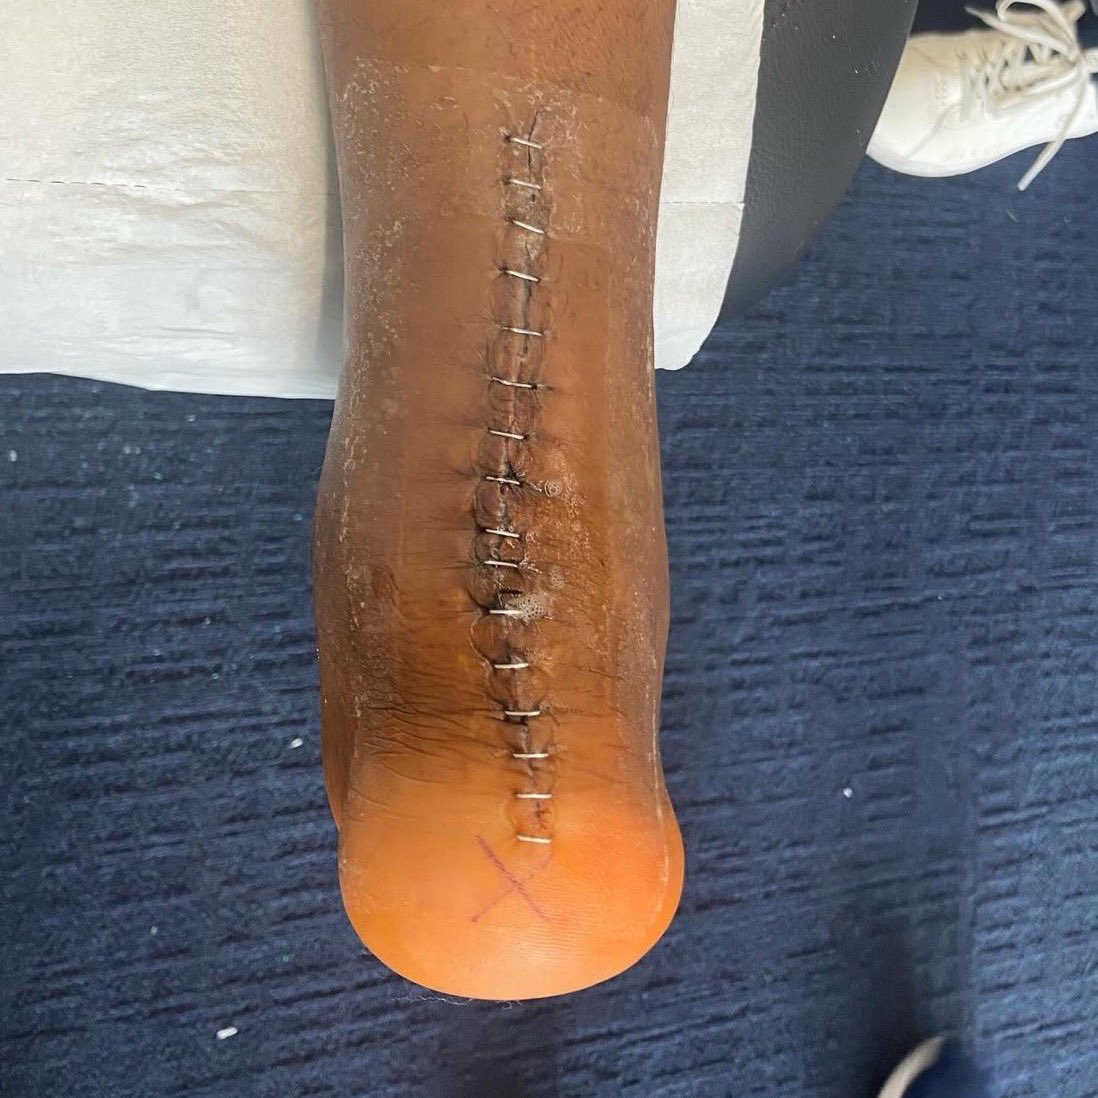 🩼😣 Presnel Kimpembe reveals the extent of his latest injury: an Achilles tendon rupture that has sidelined him for over 400 days. The image captures the back of his foot, stitched up. Wishing him strength during his recovery. 🙏